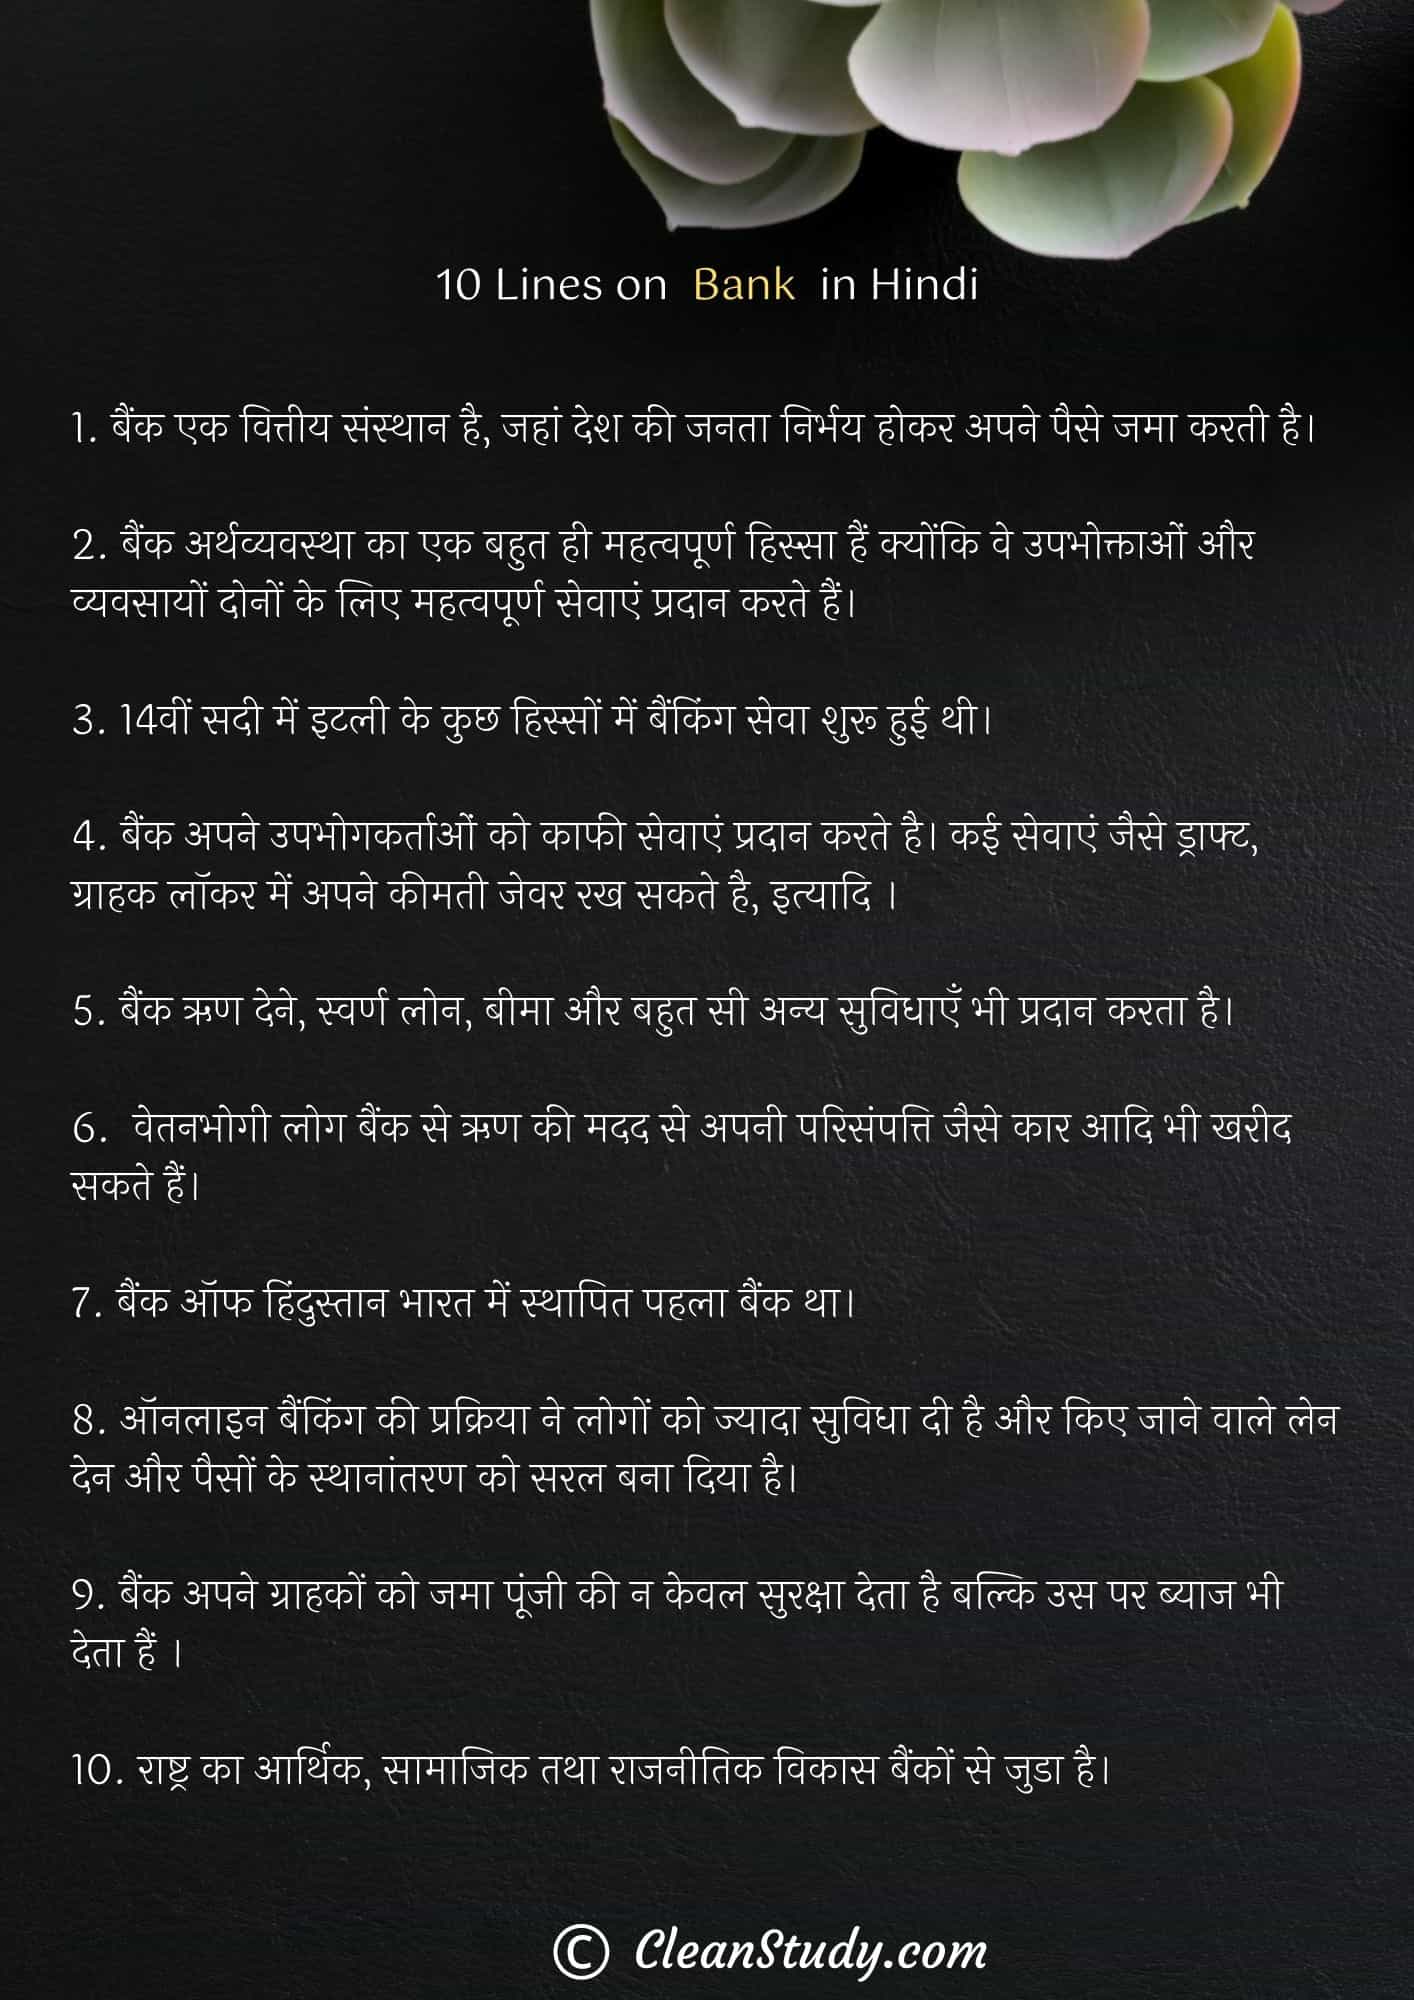 10 Lines on Bank in Hindi